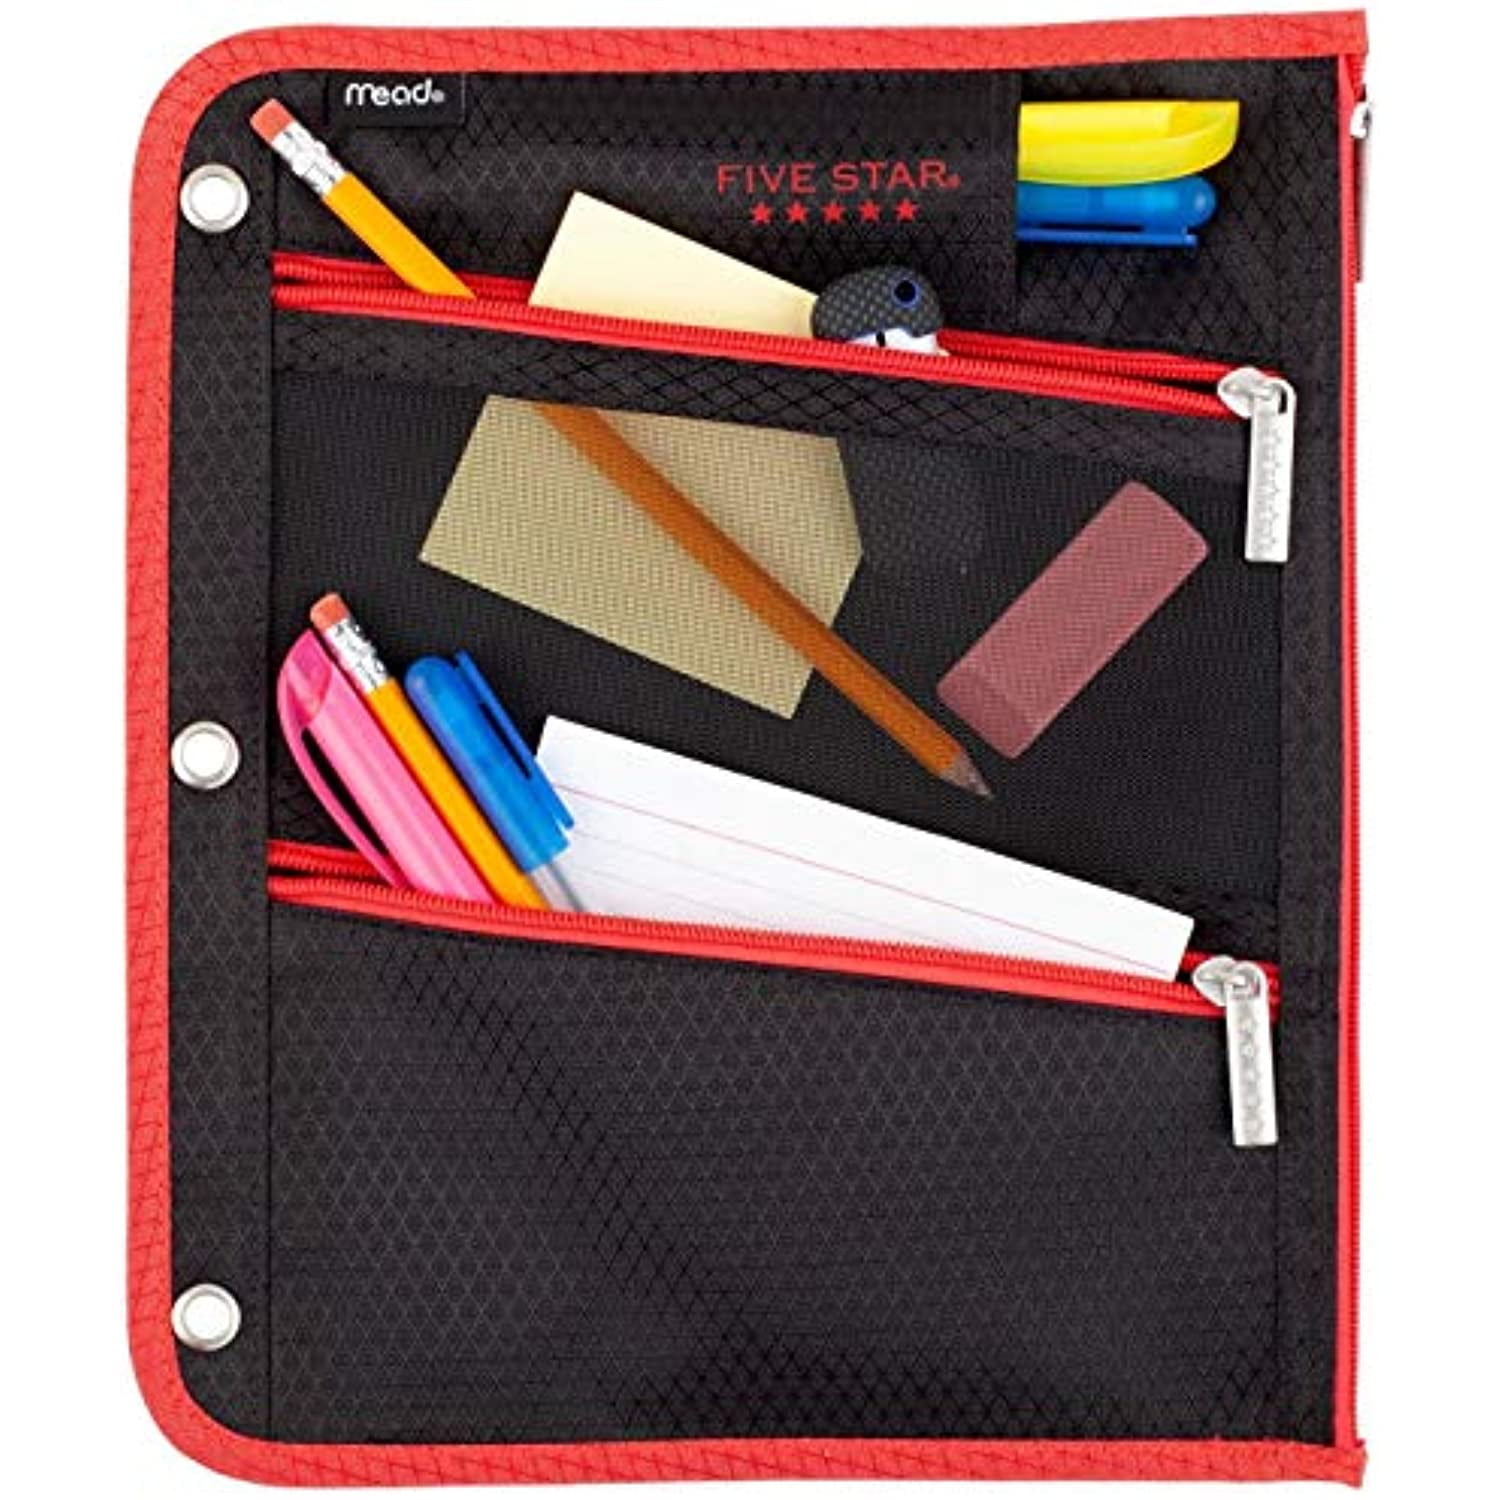 Five Star Double Zip Binder Pencil Pouch - Black/Red